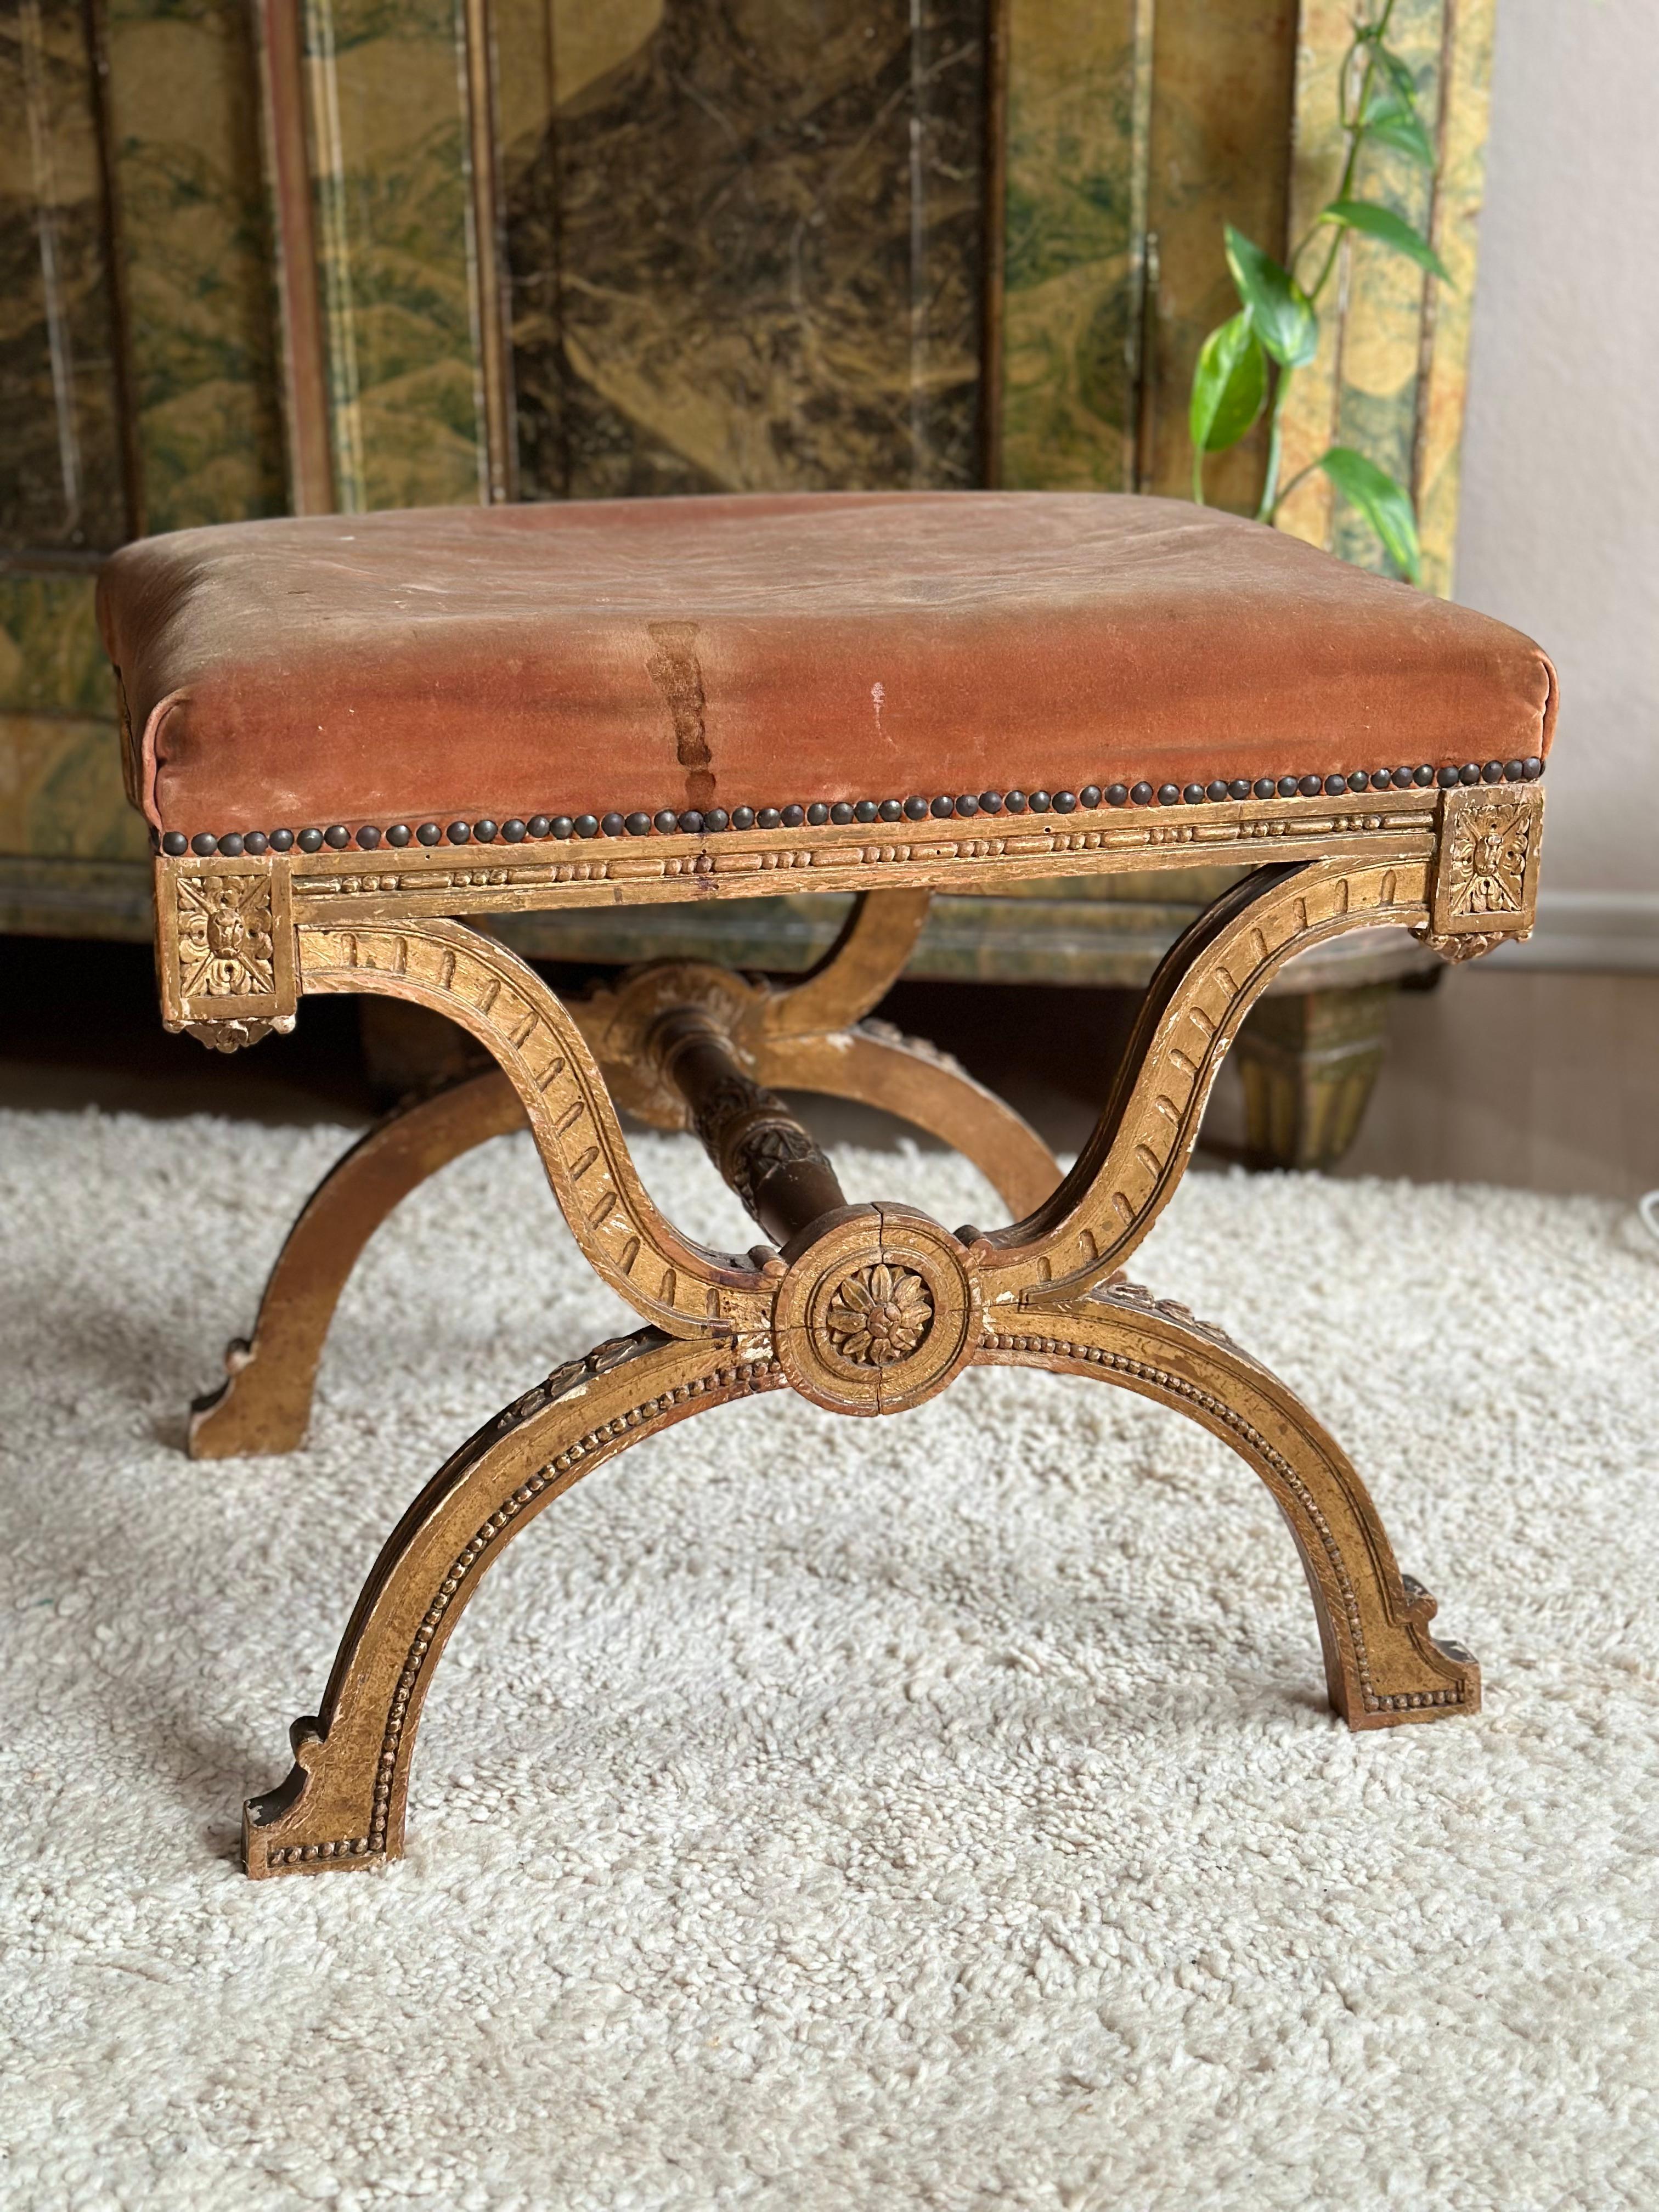 Immerse yourself in the splendid elegance of the 18th century with our exquisite Louis XVI Cross Stool, crafted around 1780 in France. This timeless stool reflects masterful craftsmanship and refined aesthetics characteristic of the Louis XVI